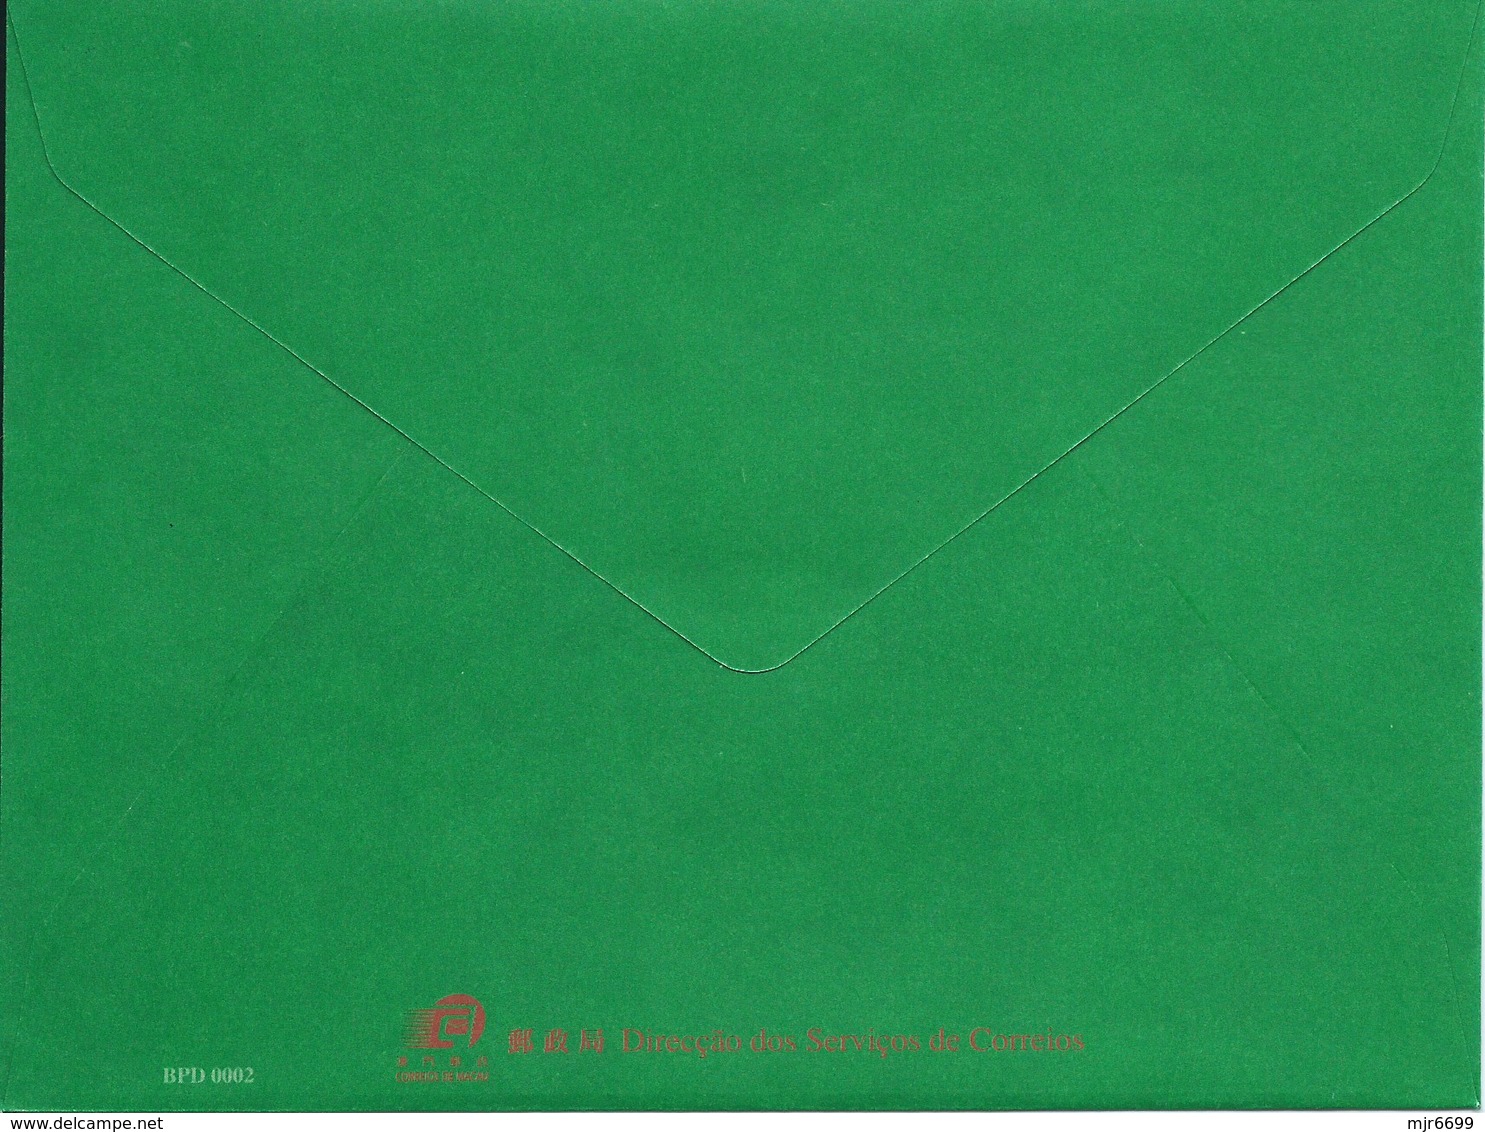 MACAU 2001 CHRISTMAS GREETING CARD & POSTAGE PAID COVER,  POST OFFICE CODE #BPD002 - Ganzsachen